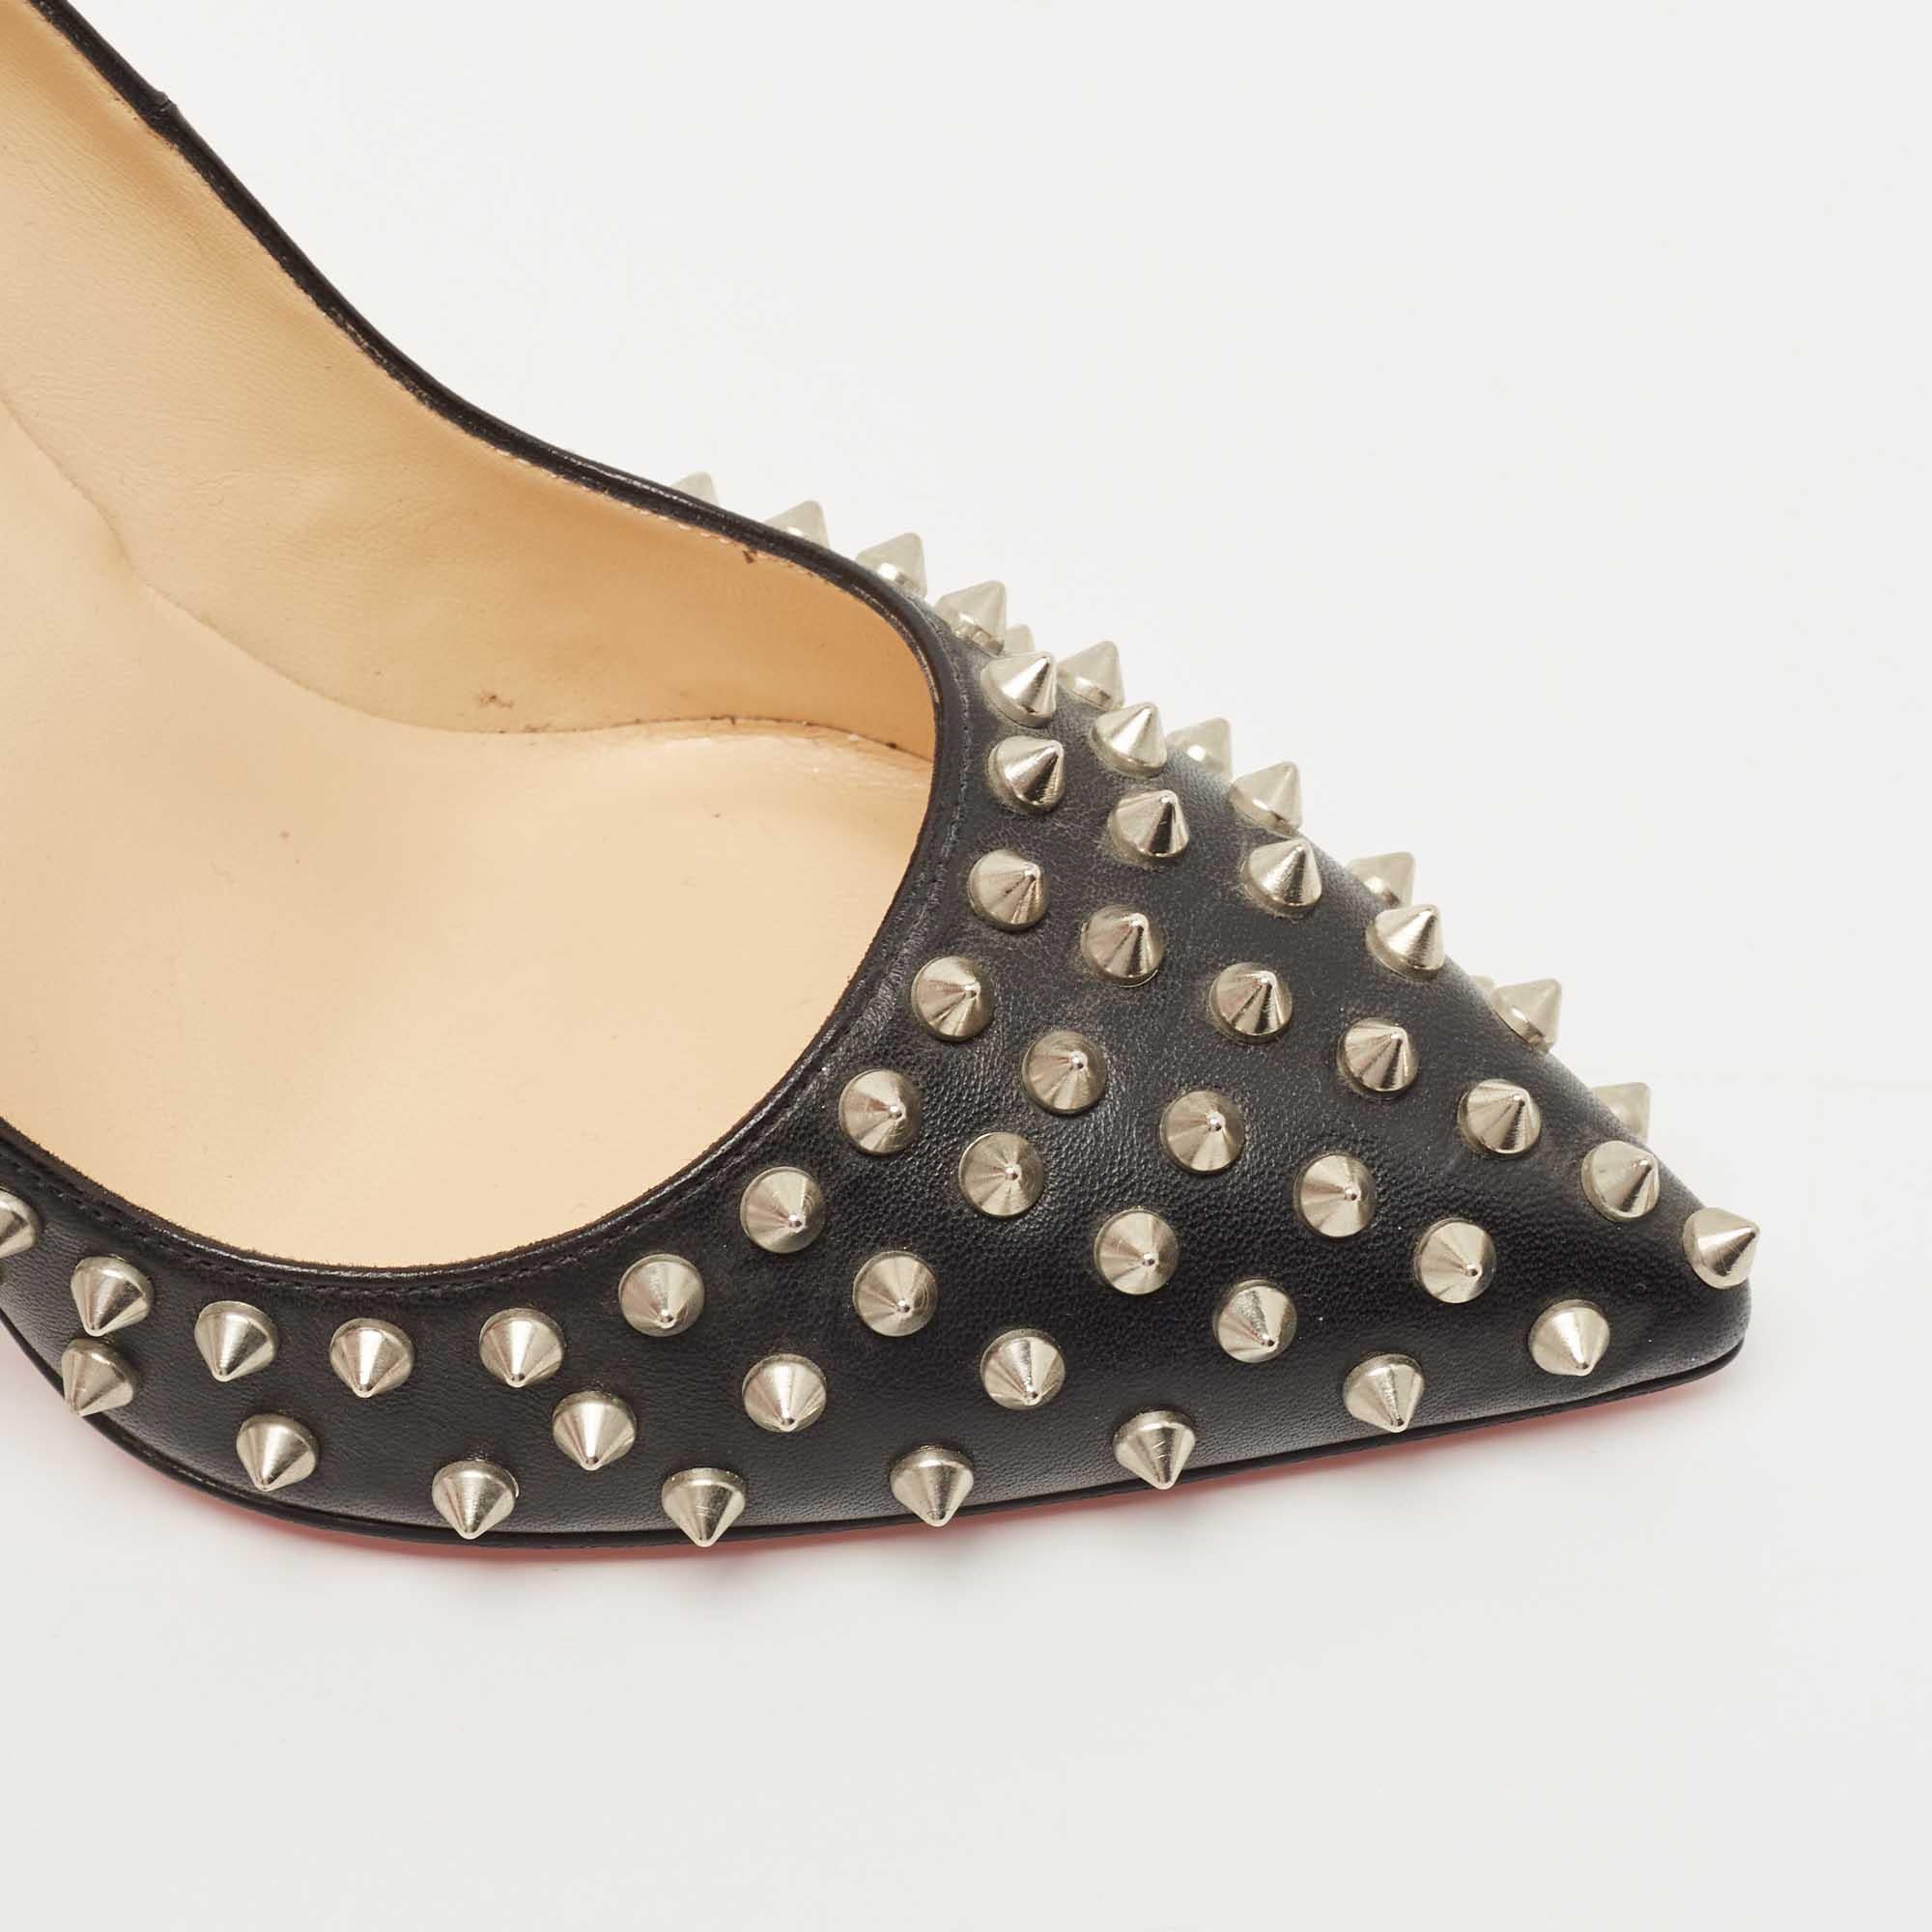 Women's Christian Louboutin Black Leather Pigalle Spikes Pumps Size 40.5